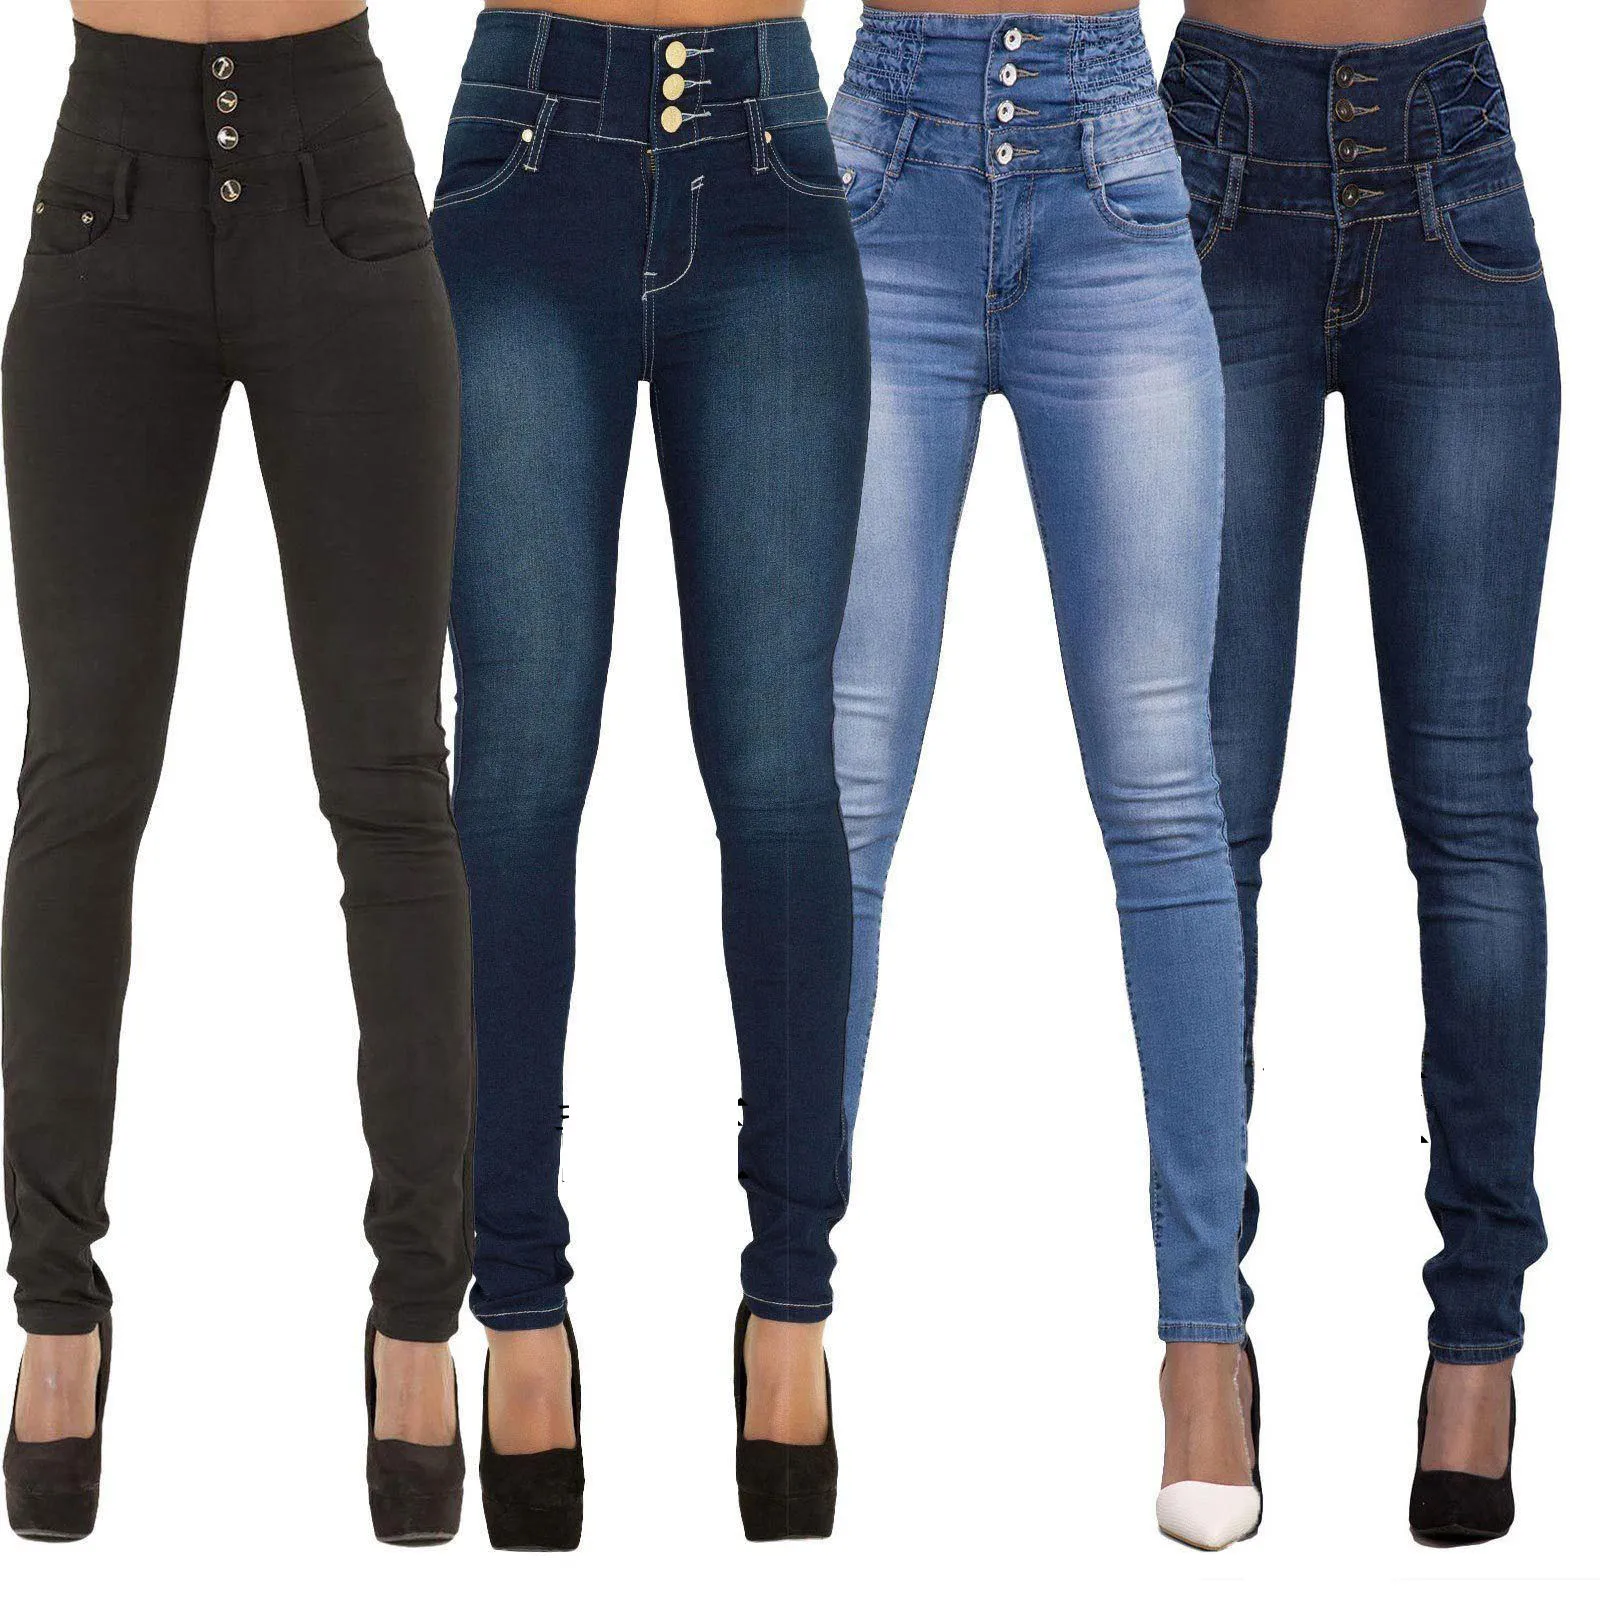 Hot Selling Women's Mew High Waist Slim Fit Stretch Pus Size Skinny Jeans for Women